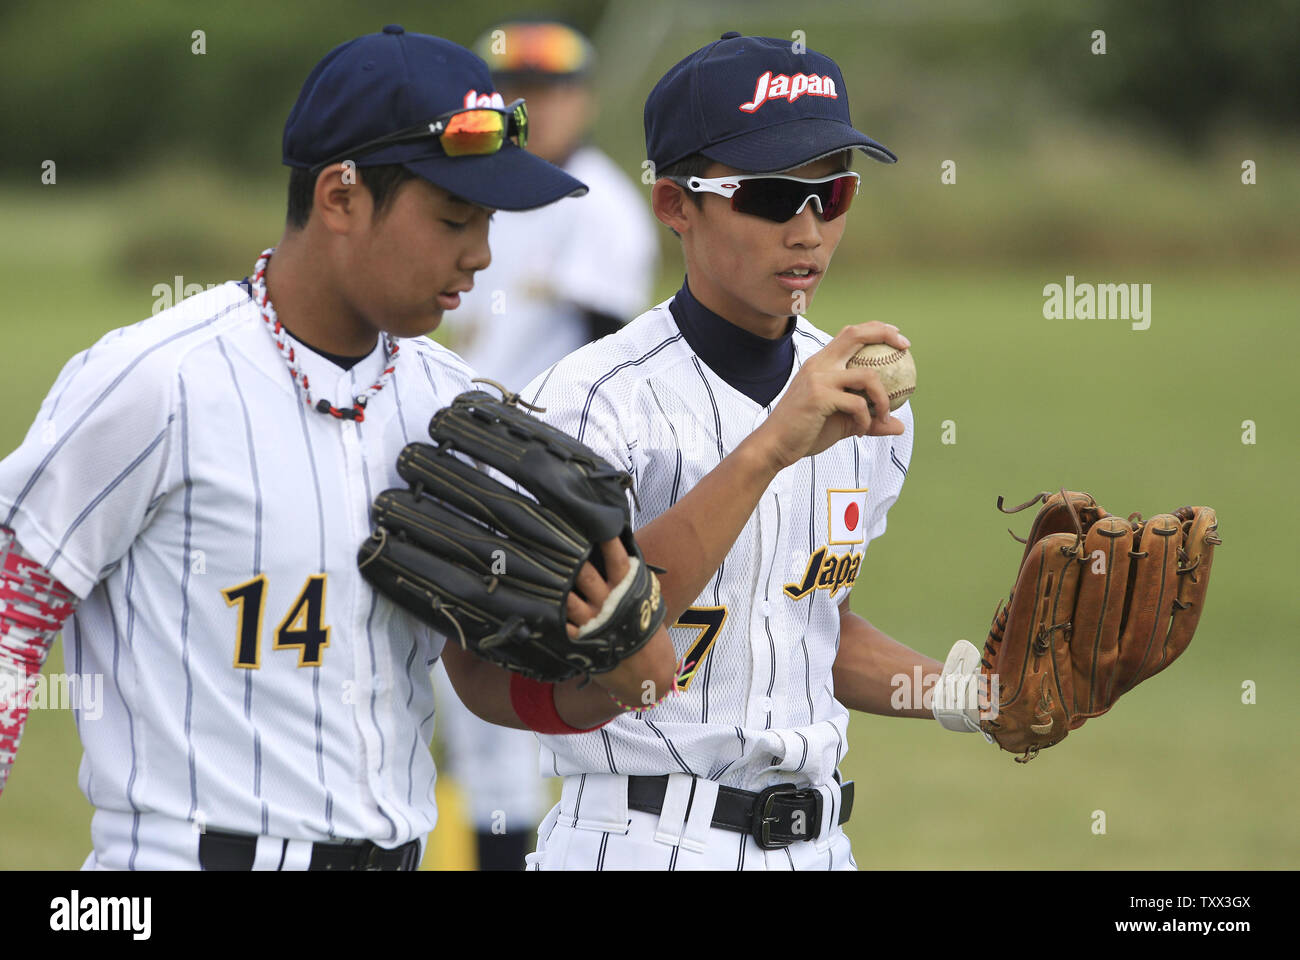 (L-R) Japan's Kohei Fujishita and Kaito Seike before their first game against Los Lomas Potros during the McHenry County Youth Sports Association's 23rd annual 15-Year-Old International Championship on August 1, 2015 in Crystal Lake, Illinois.  Japan lost to Los Lomas Potros 6-4 in their first game but defeated them 3-2 in their second game to win the championship.. Photo by John Konstantaras/UPI Stock Photo